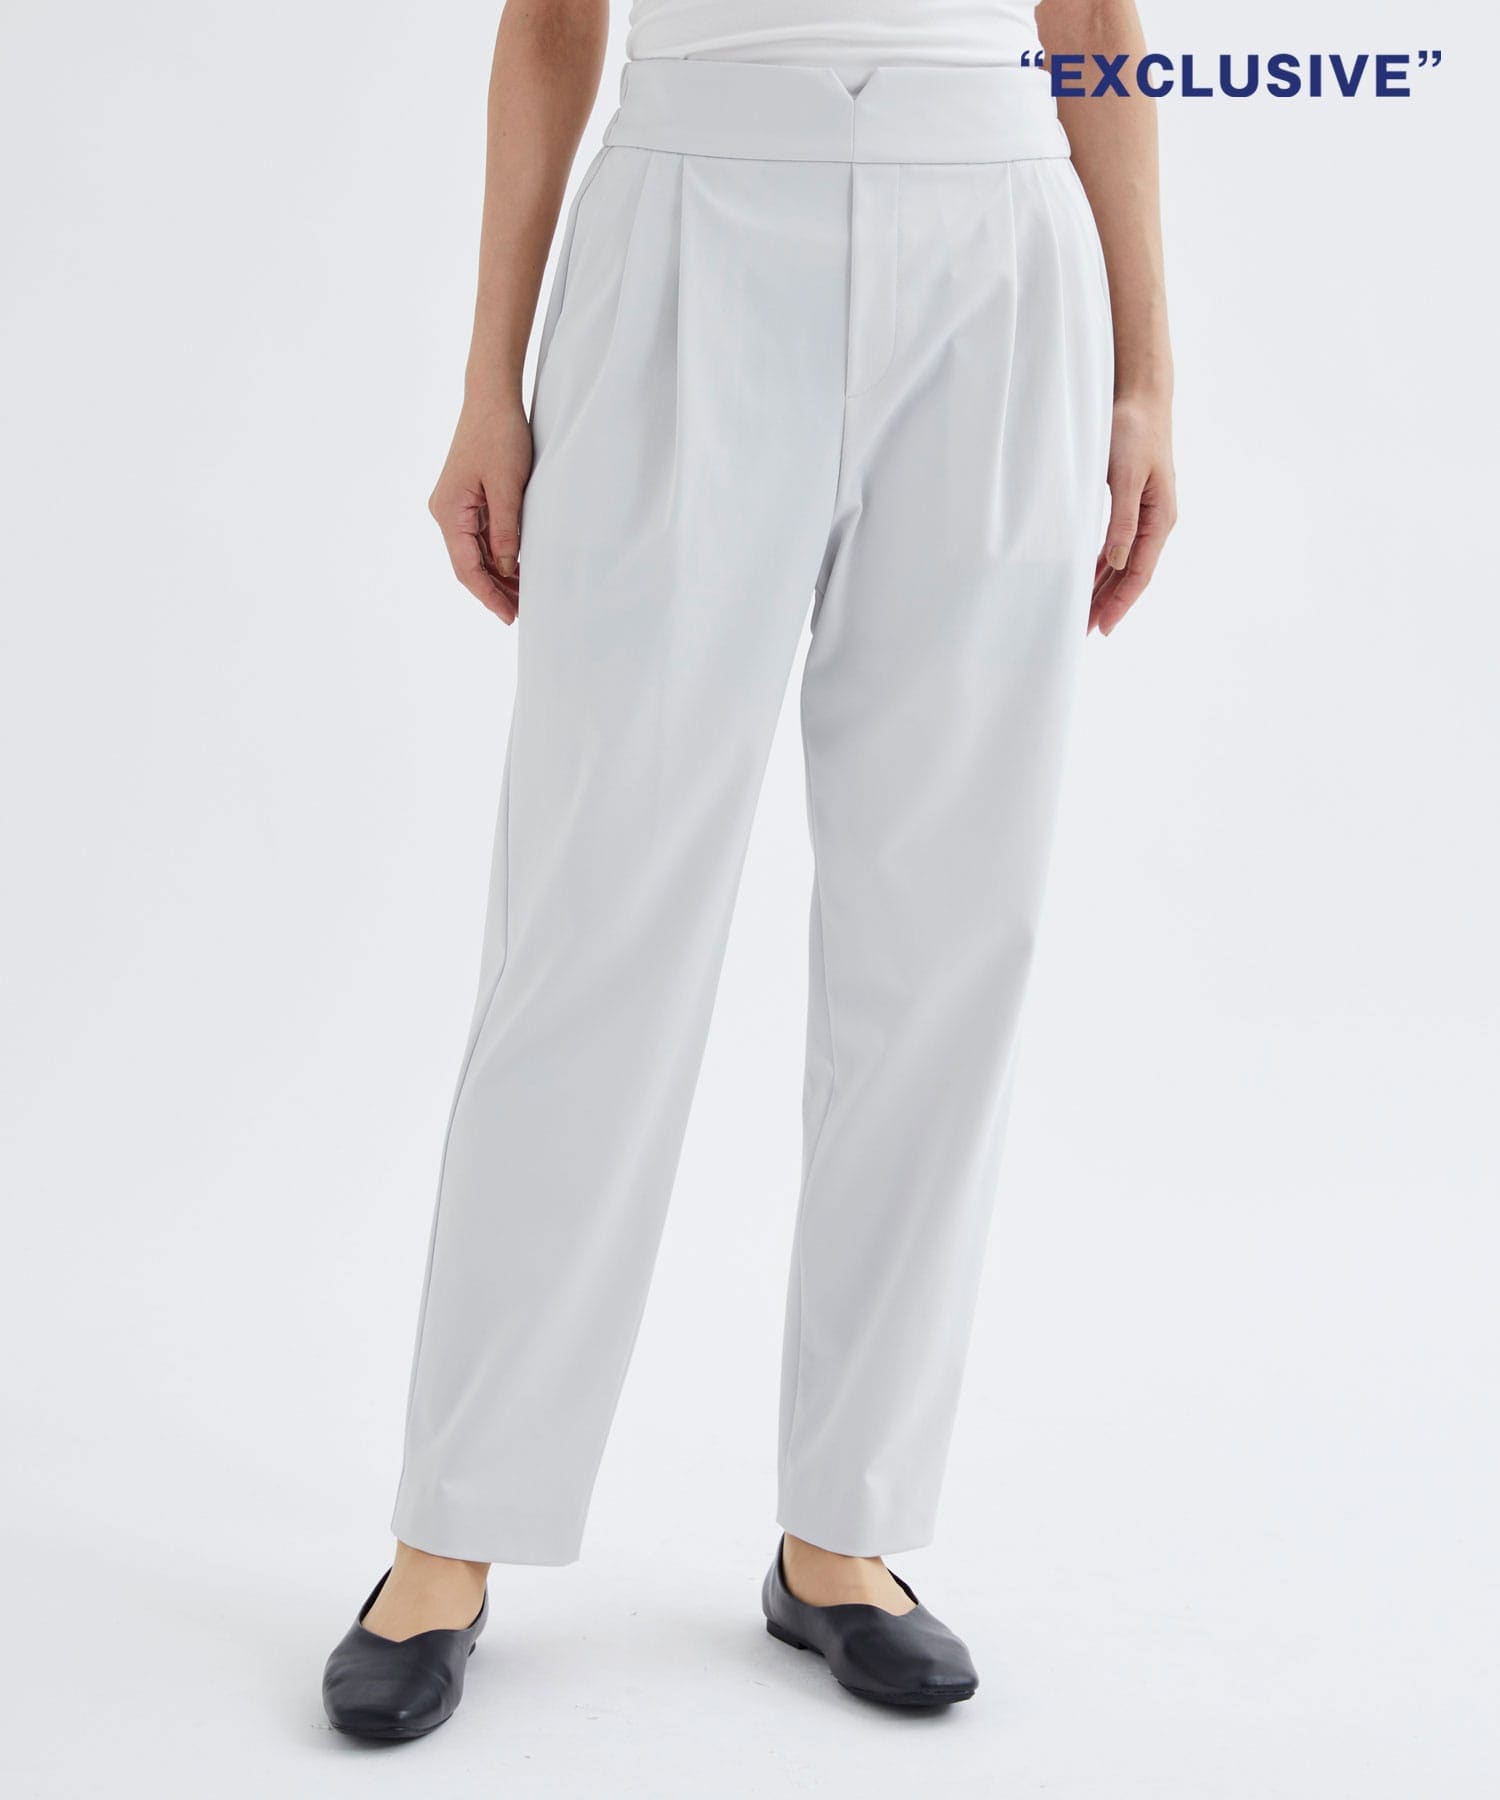 WASHABLE HIGH FANCTION TAPERD PANTS